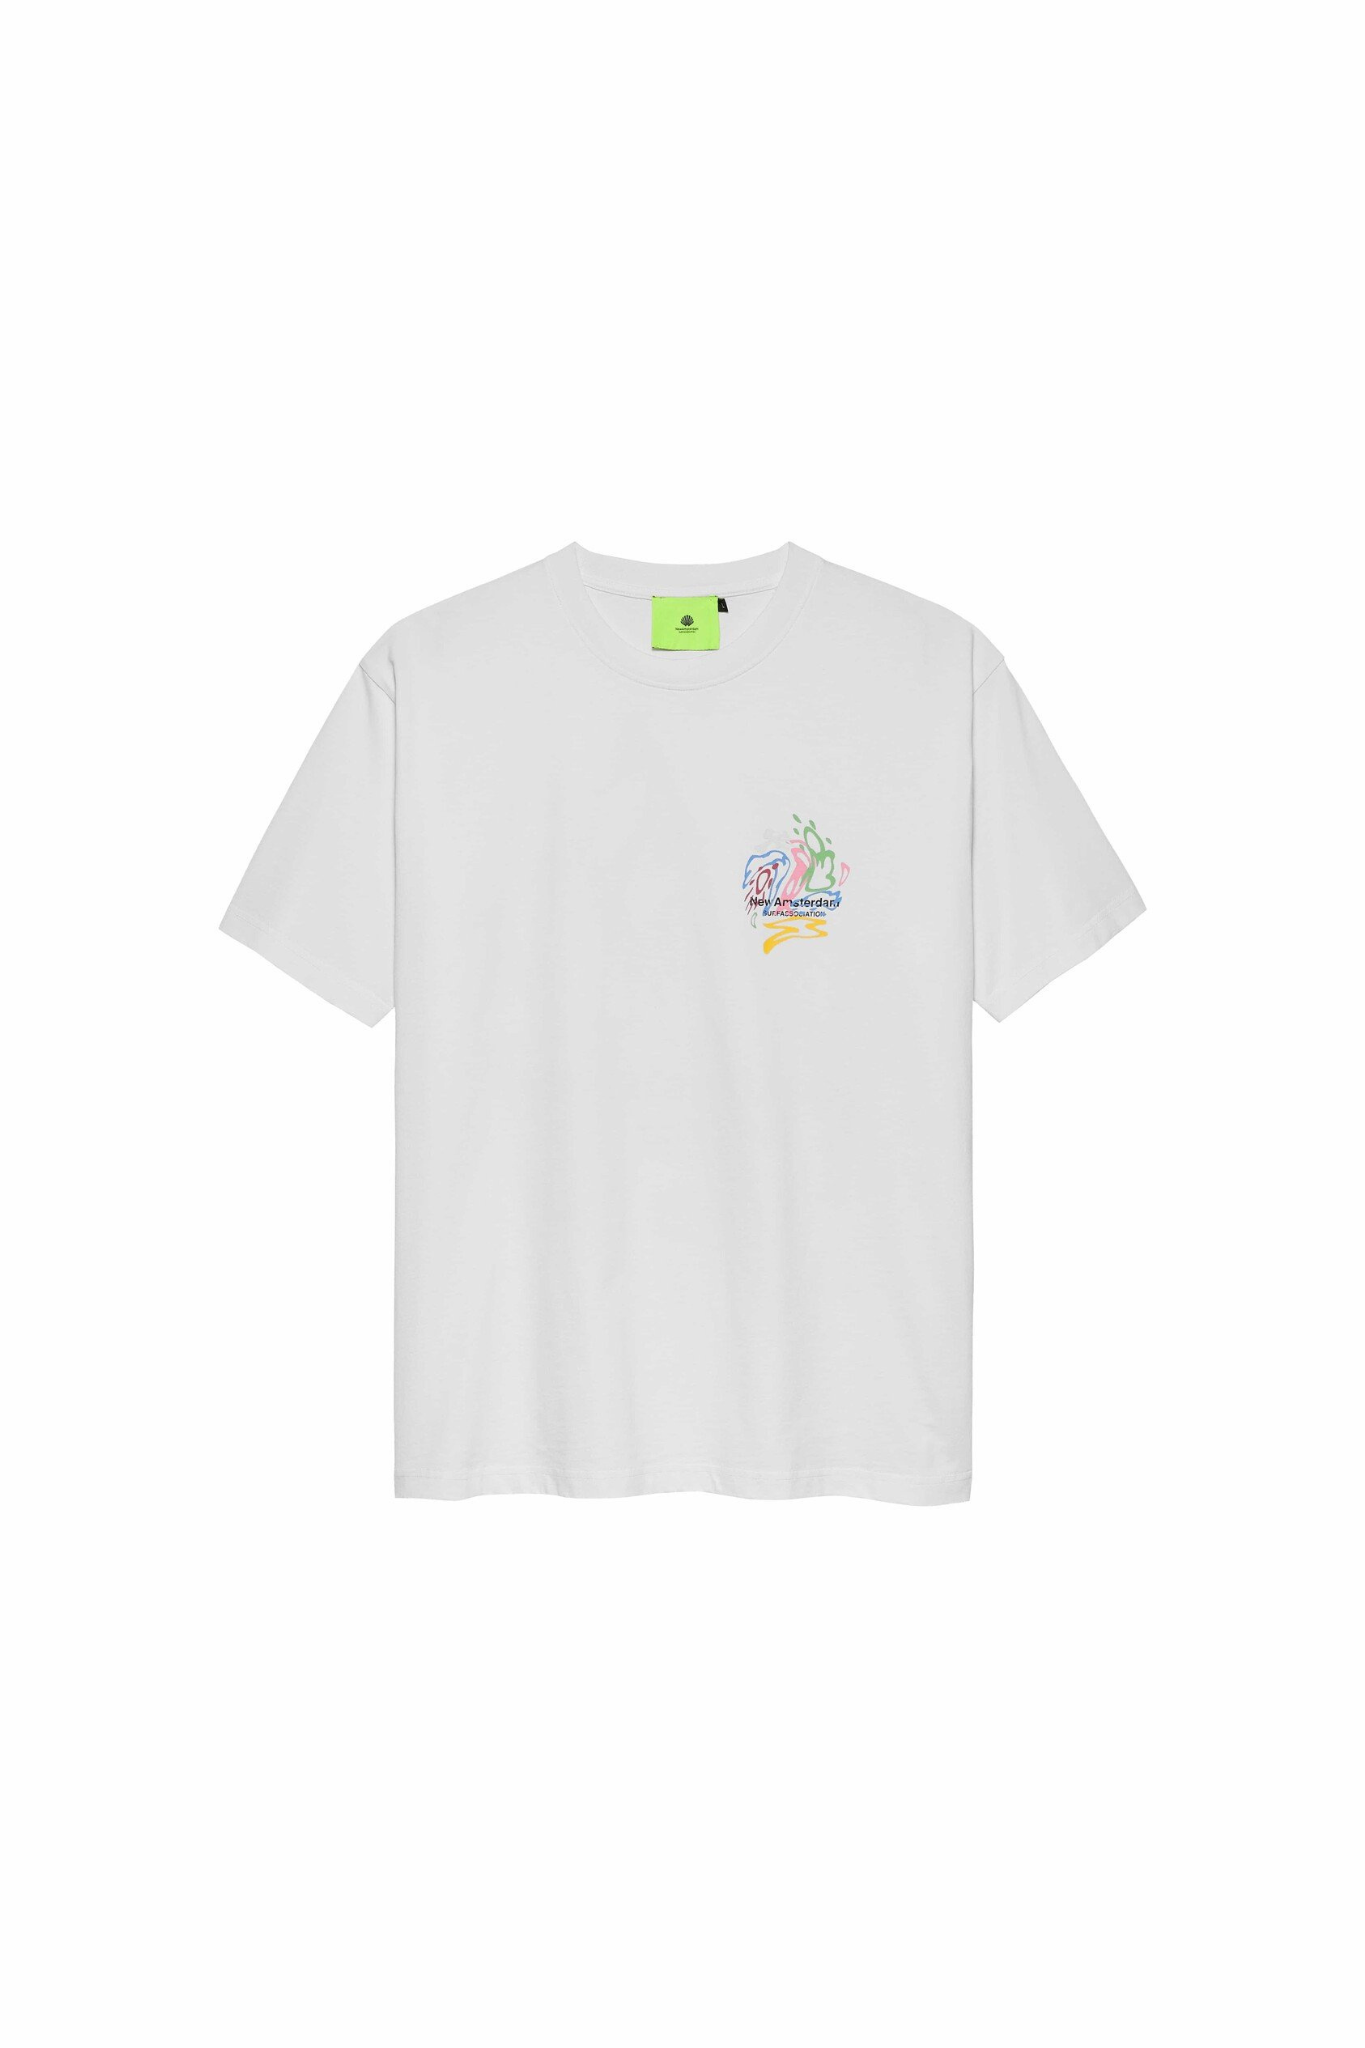 WEATHER ICONS T-SHIRT - WHITE